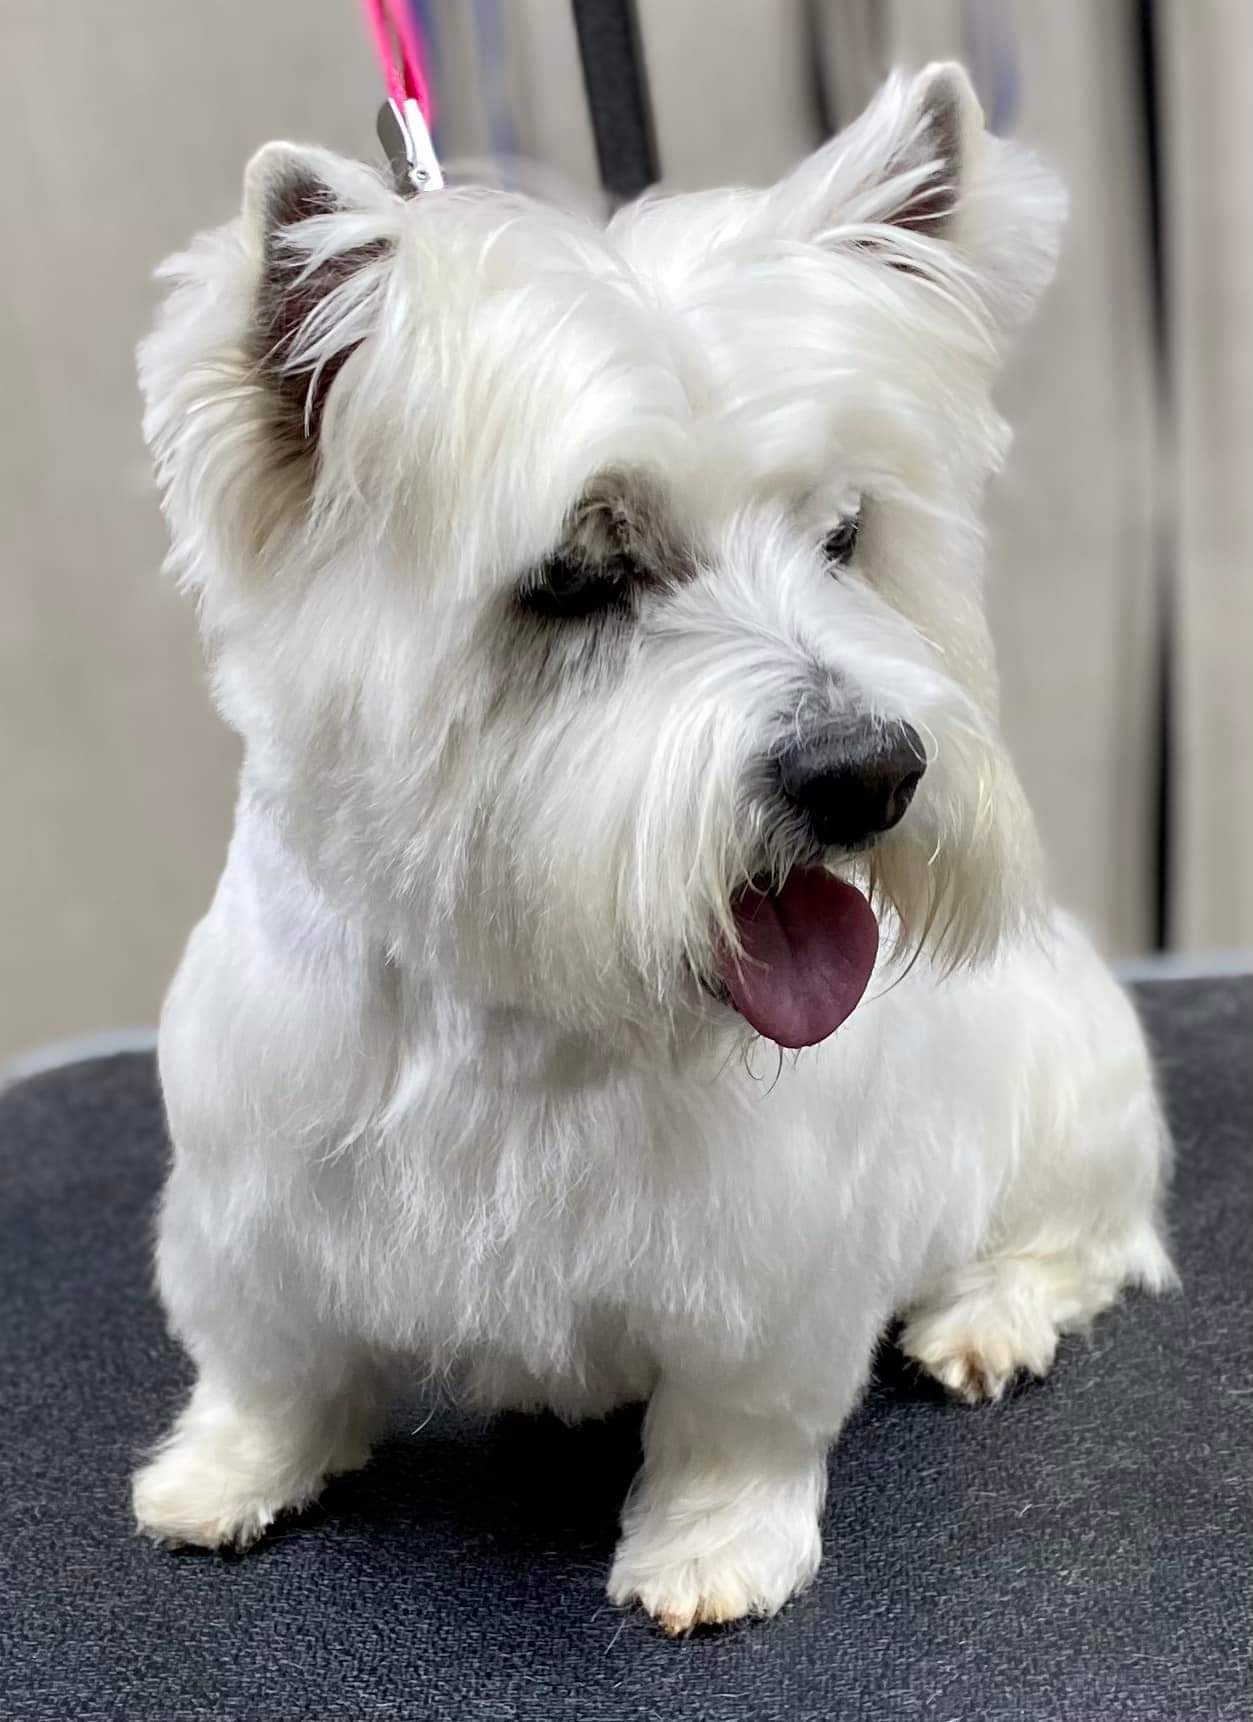 Yorkie groomed by student at mastergroomersacademy.com